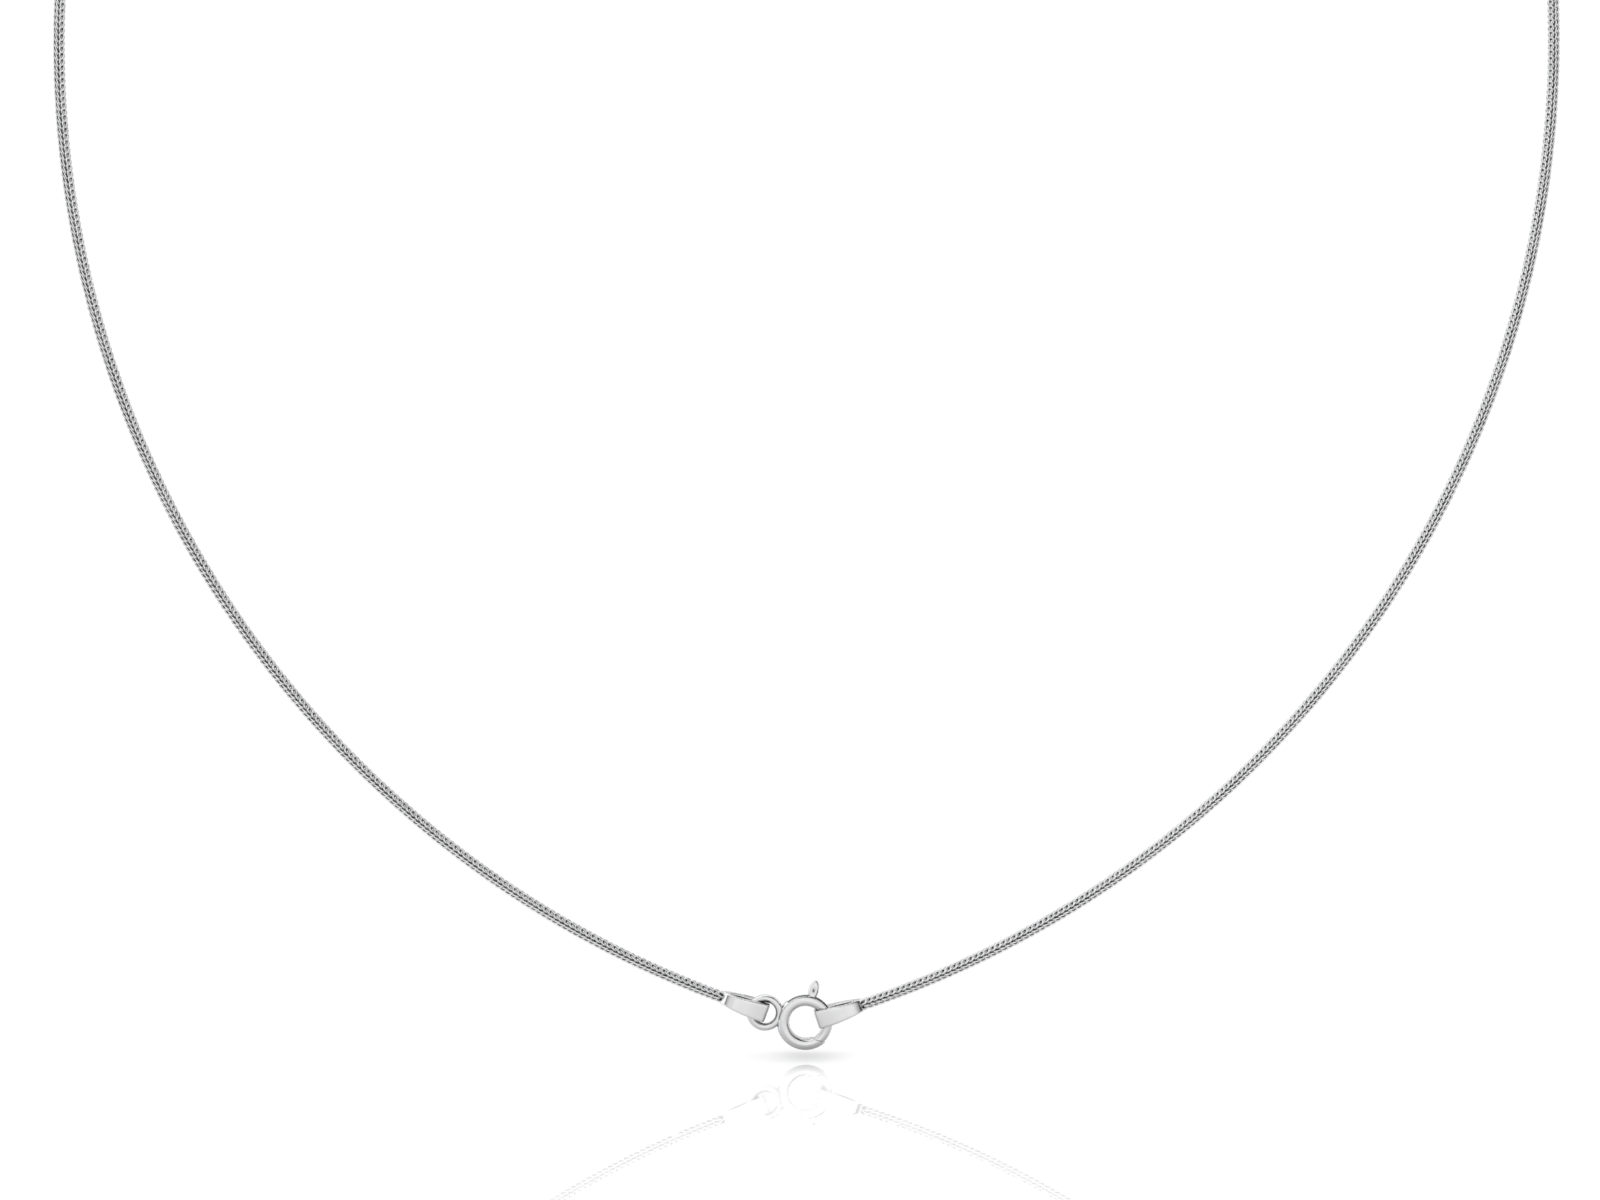 Snake (1.5mm) Sterling Silver Chain, 18", 20", 24", 30"